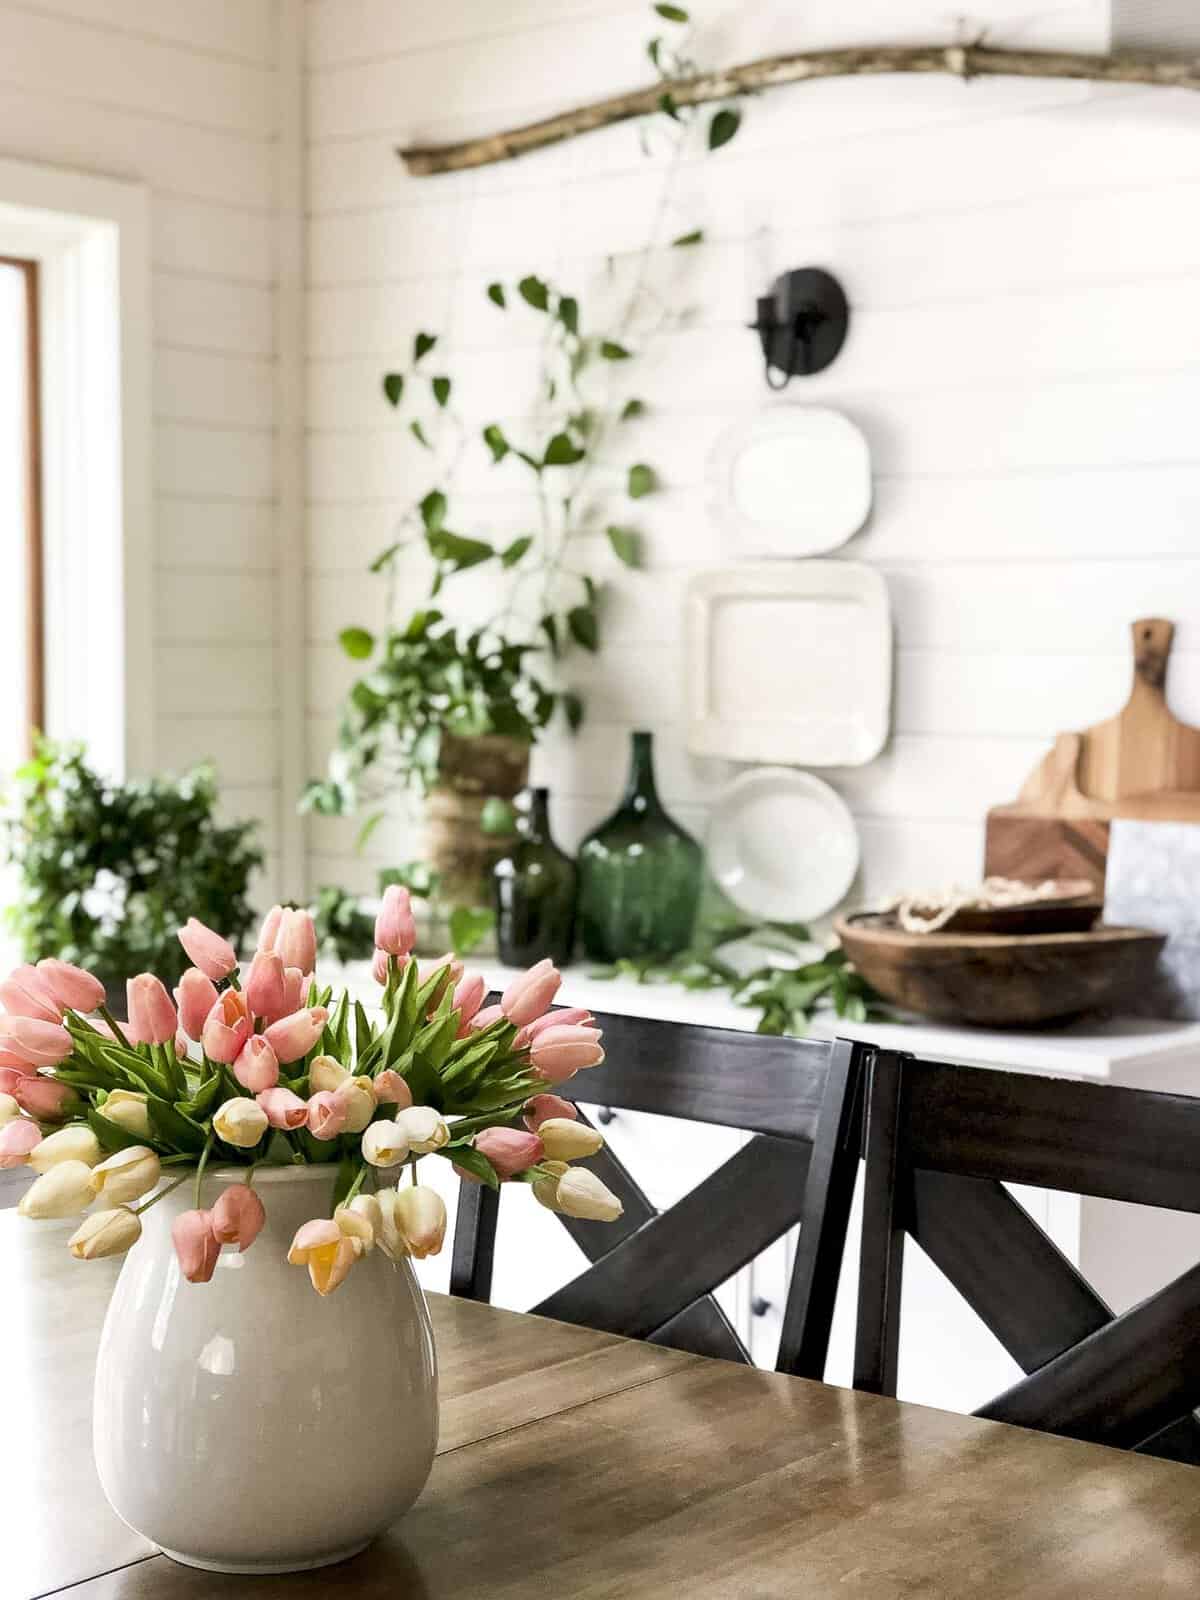 Do you have an eclectic design style? Today I'm sharing how I take my spring vintage farmhouse decor and modernize it with a hint of boho! #fromhousetohaven #springvintagefarmhousedecor #vintagefarmhouse #bohofarmhouse